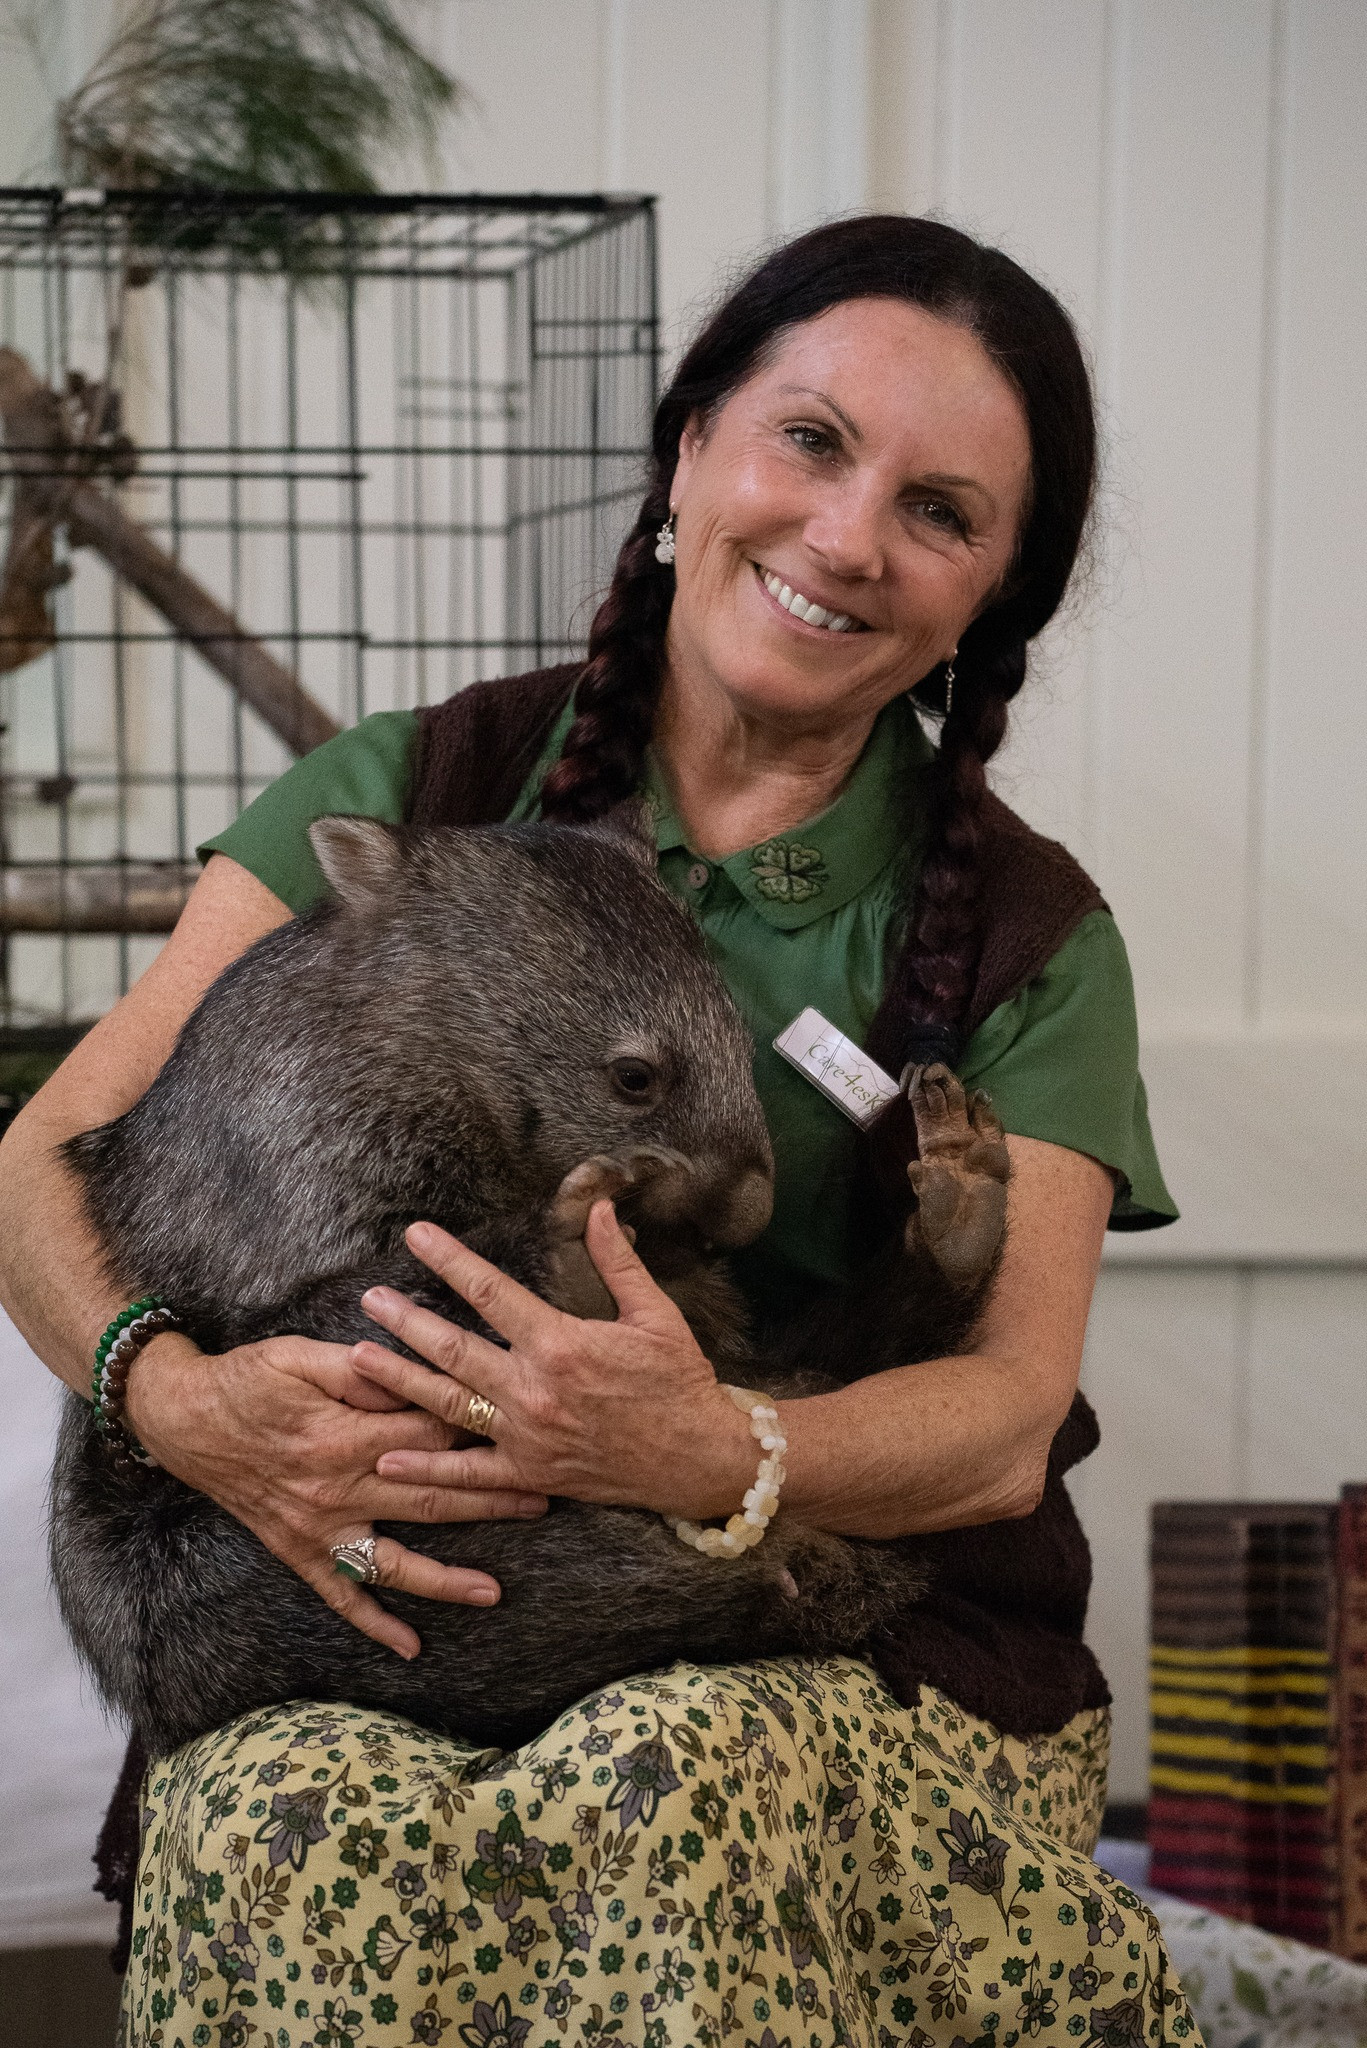 Jacqui Bate from Care4esK enjoys the company of special guest Bumpy the wombat. Photo credit: Nadia Latter/Only With You Photography.